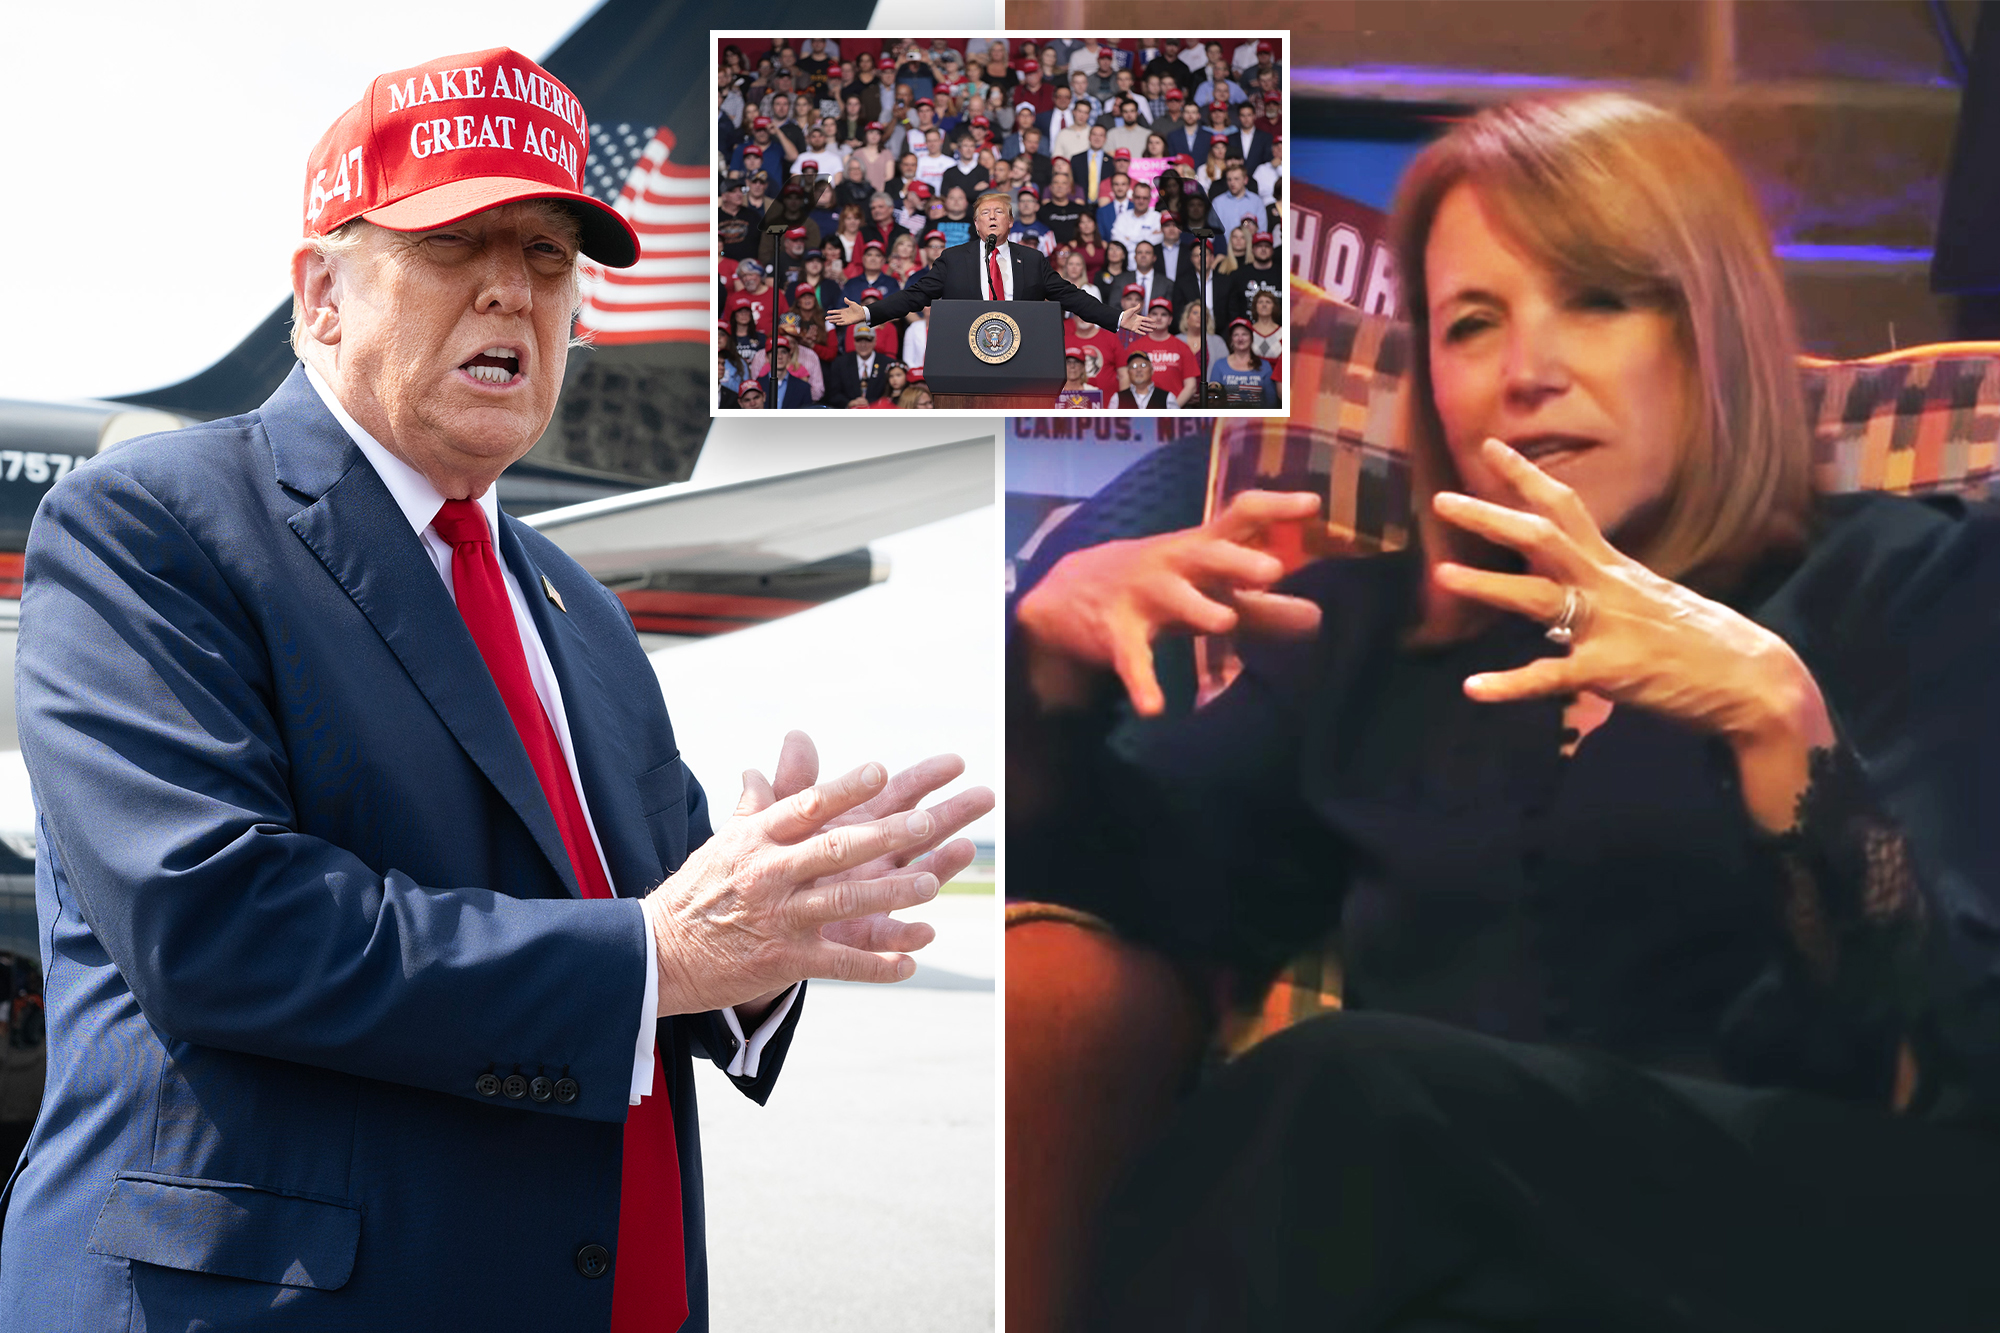 Katie Couric slammed as 'out of touch' for claiming Trump's MAGA driven by 'anti-intellectualism'